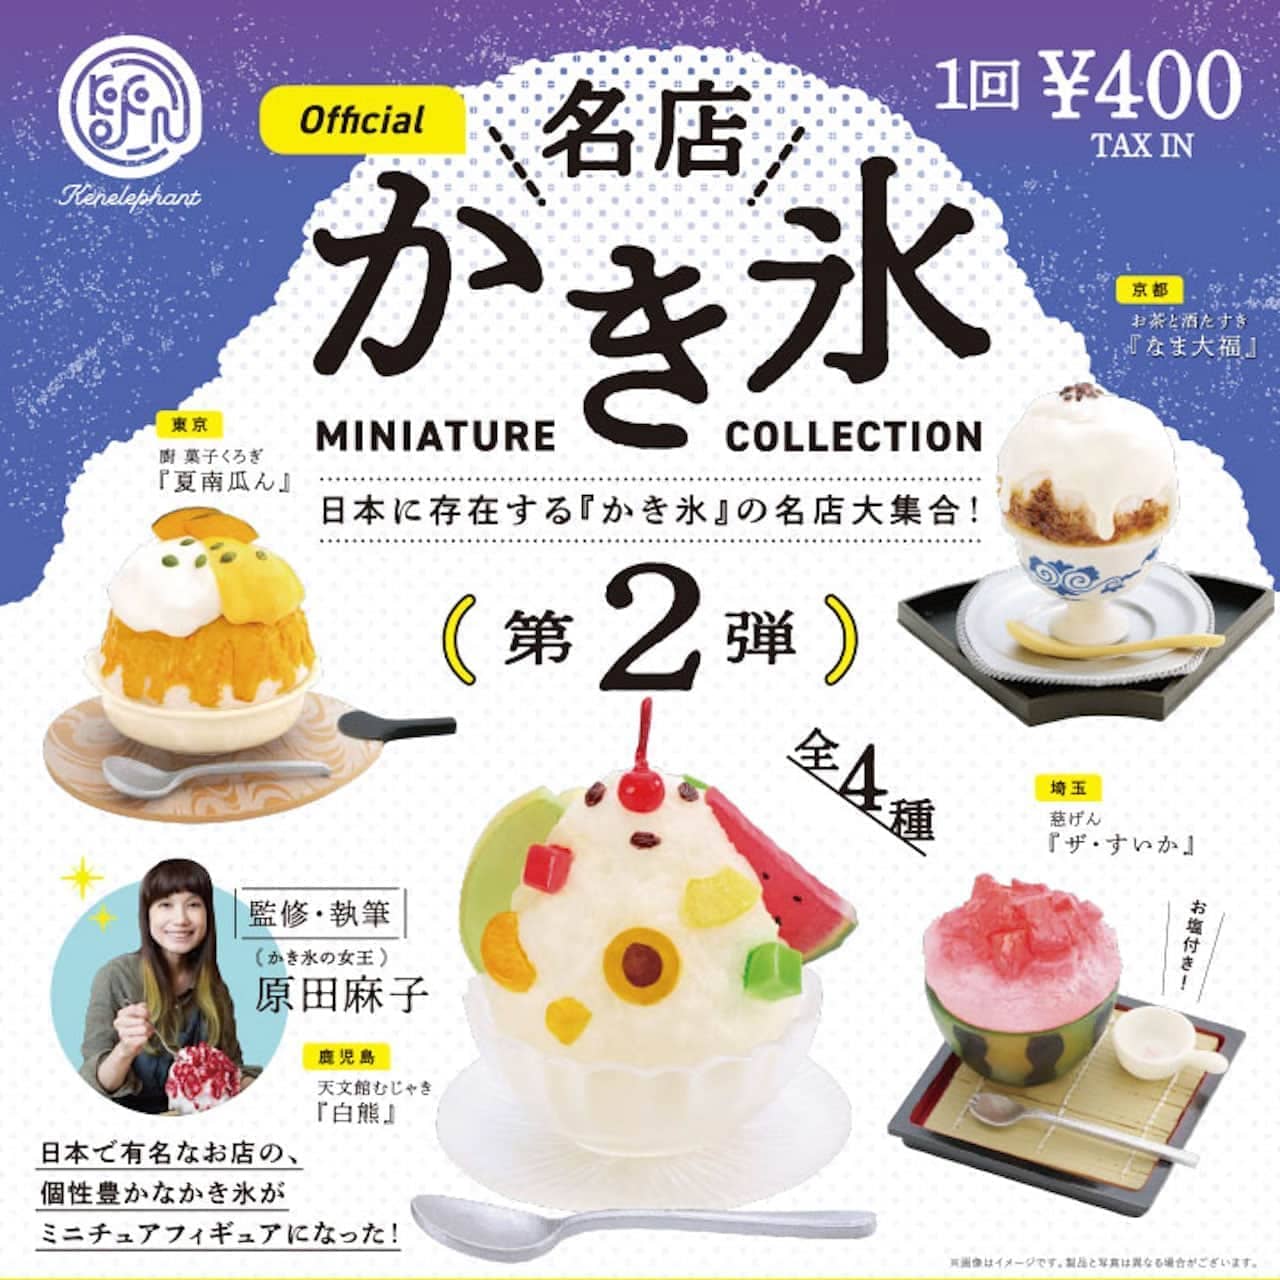 Shaved Ice Miniature Collection Vol. 2" from Ken Elephant.